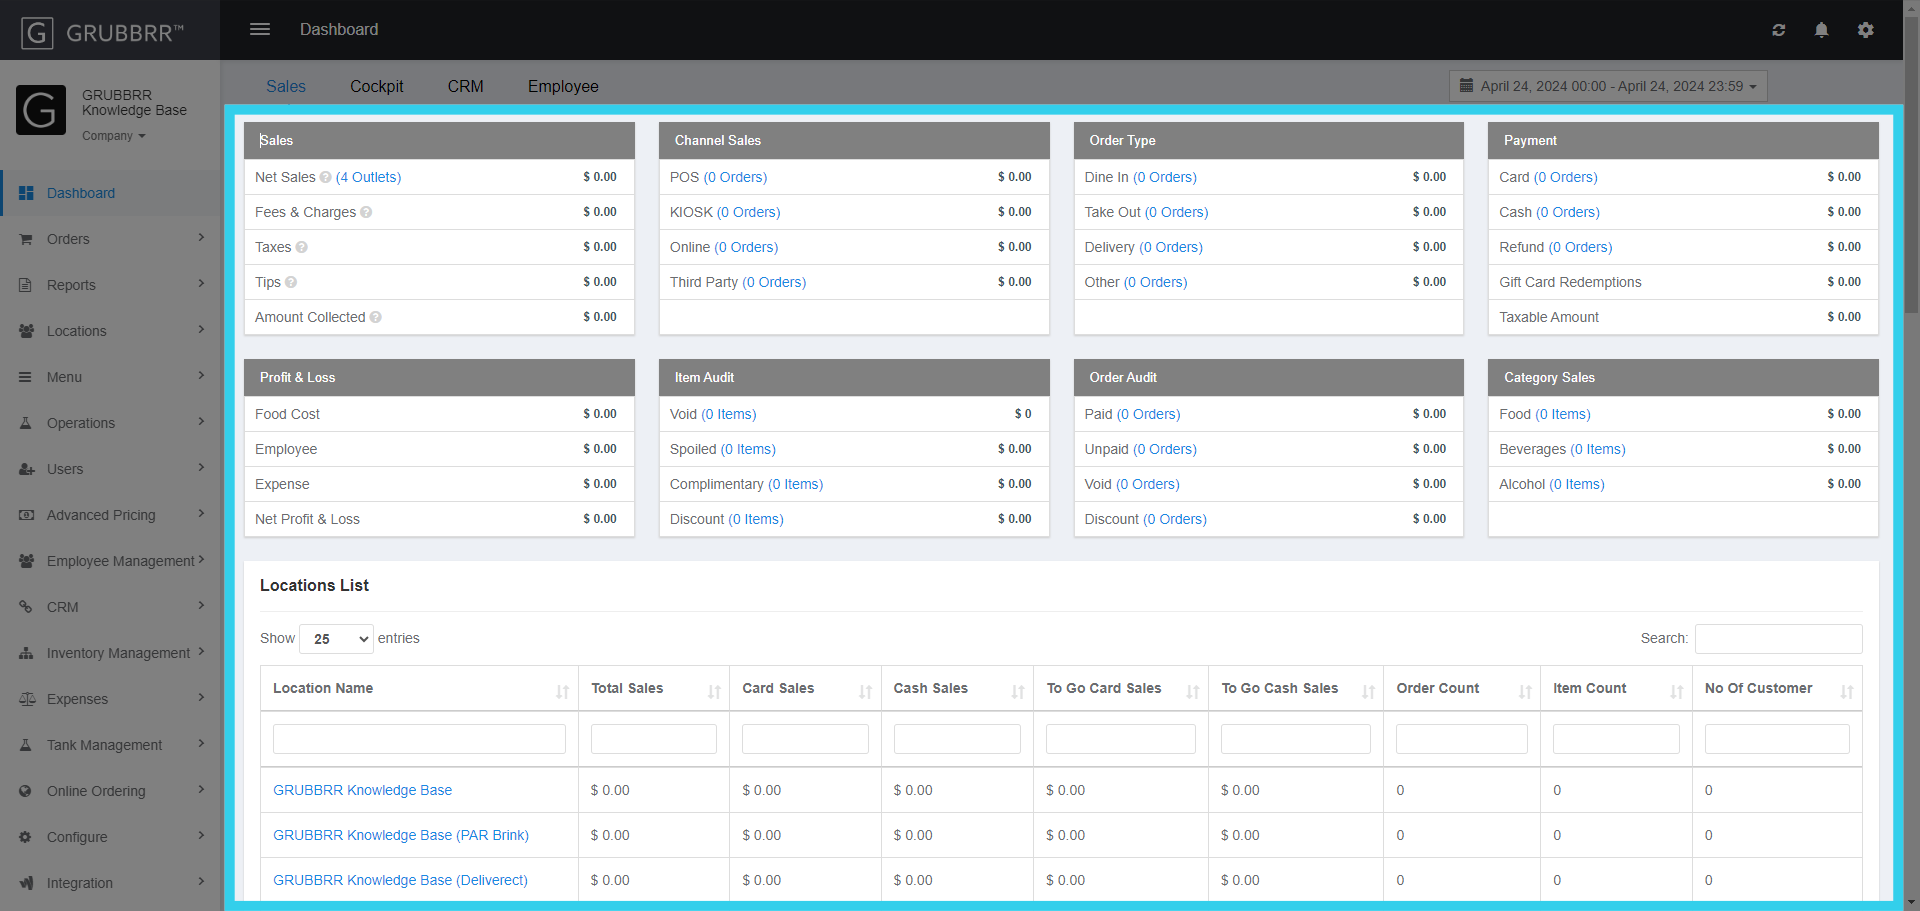 The Company Level Dashboard allows you to track KPIs across all active locations from a single page